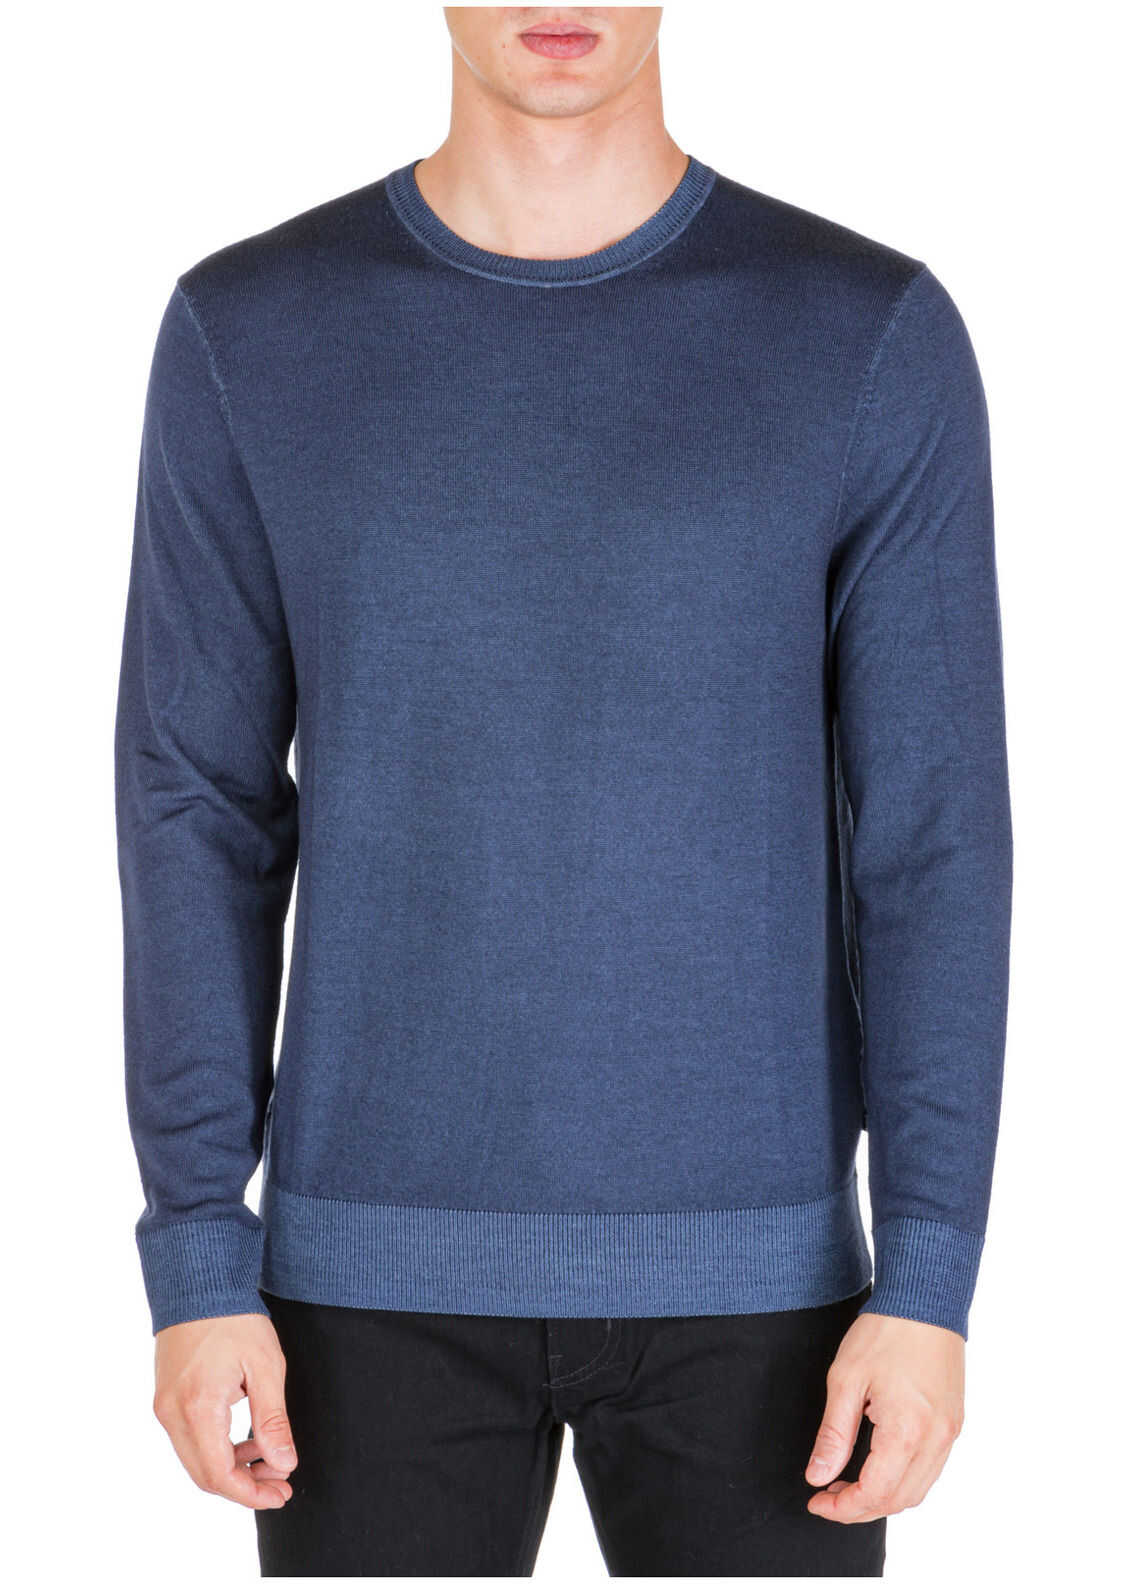 Michael Kors Sweater Pullover Blue image14